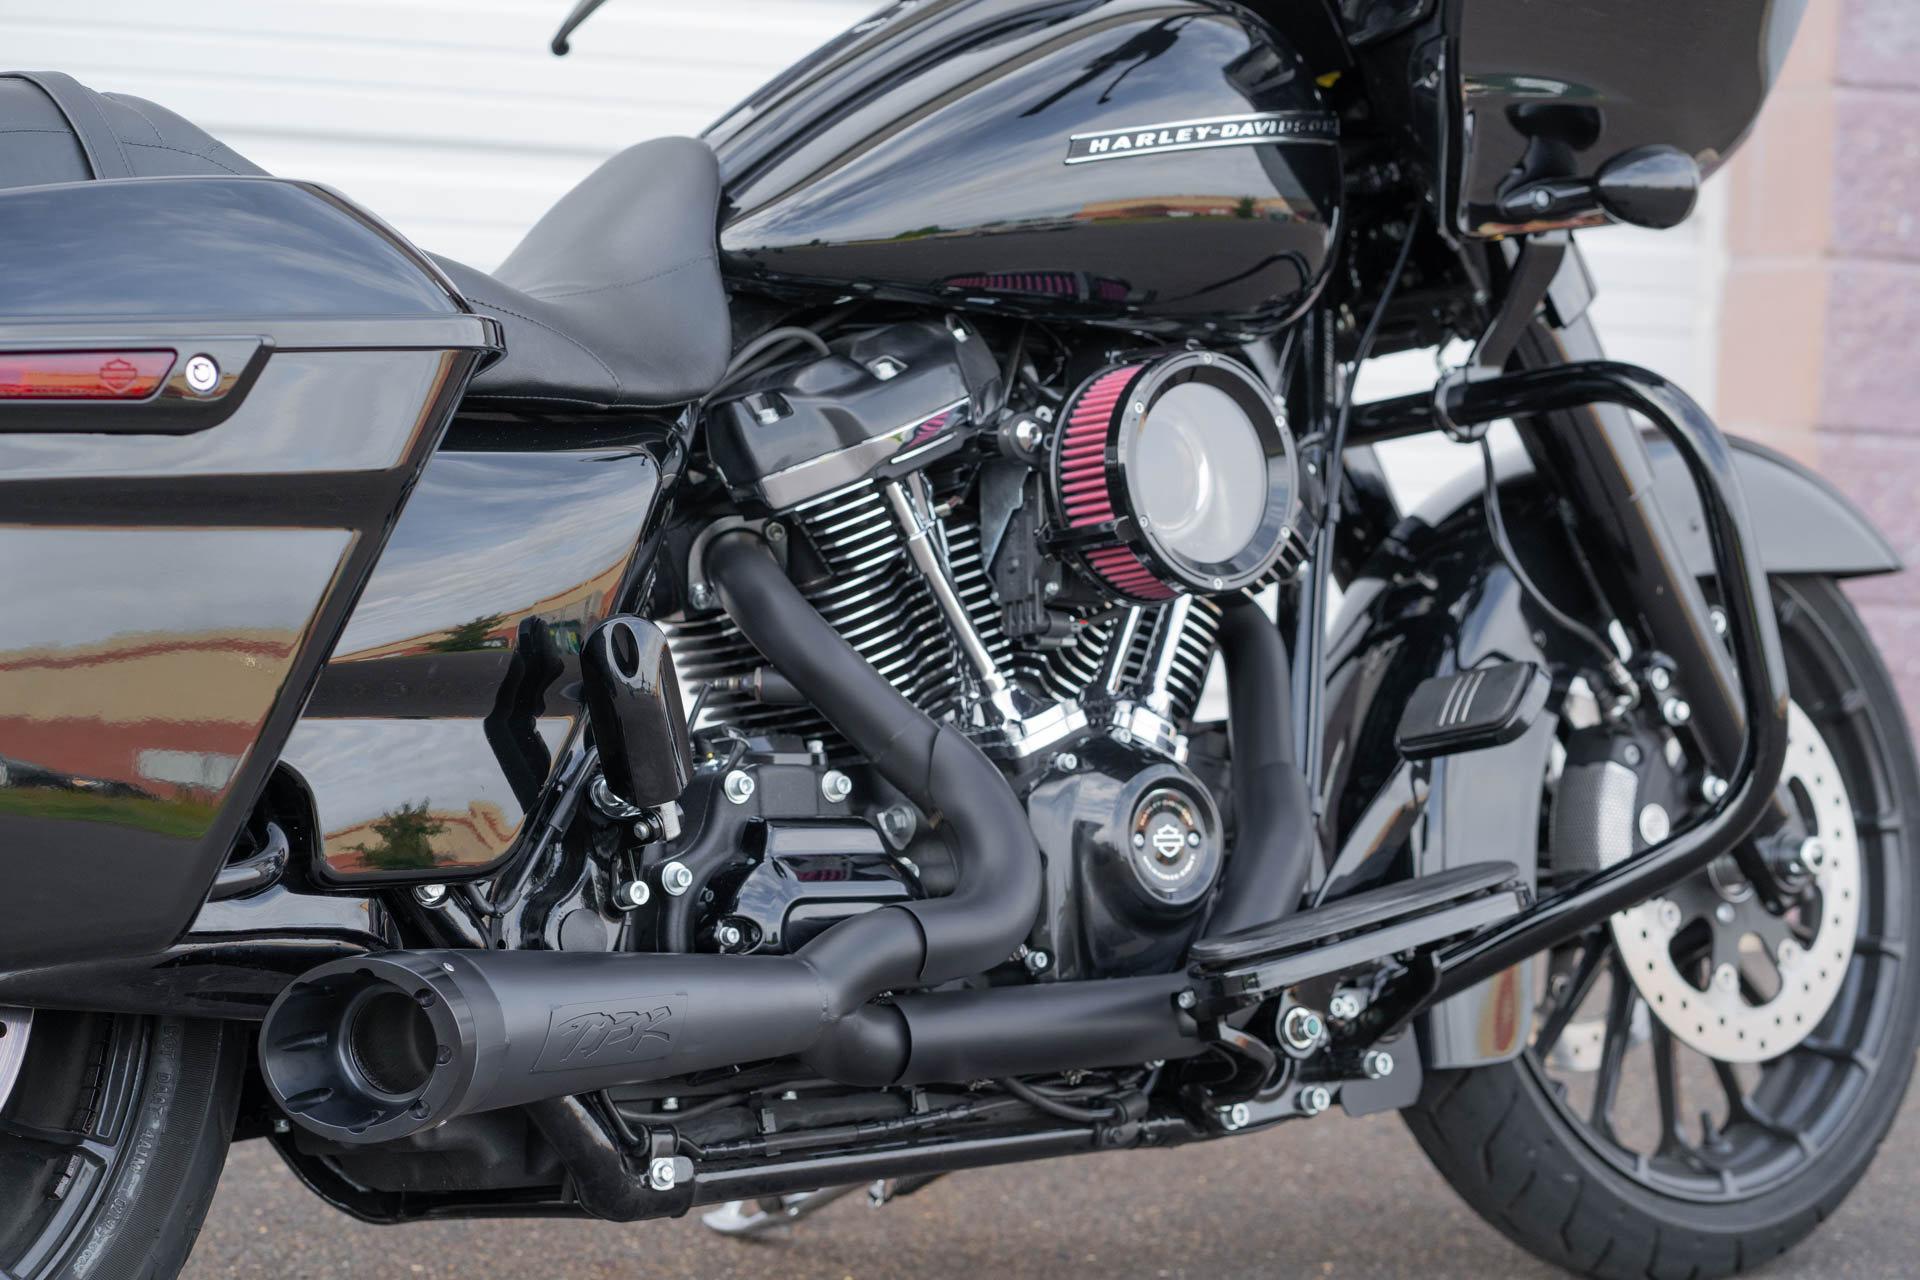 2020 street glide special exhaust - Online Discount Shop for